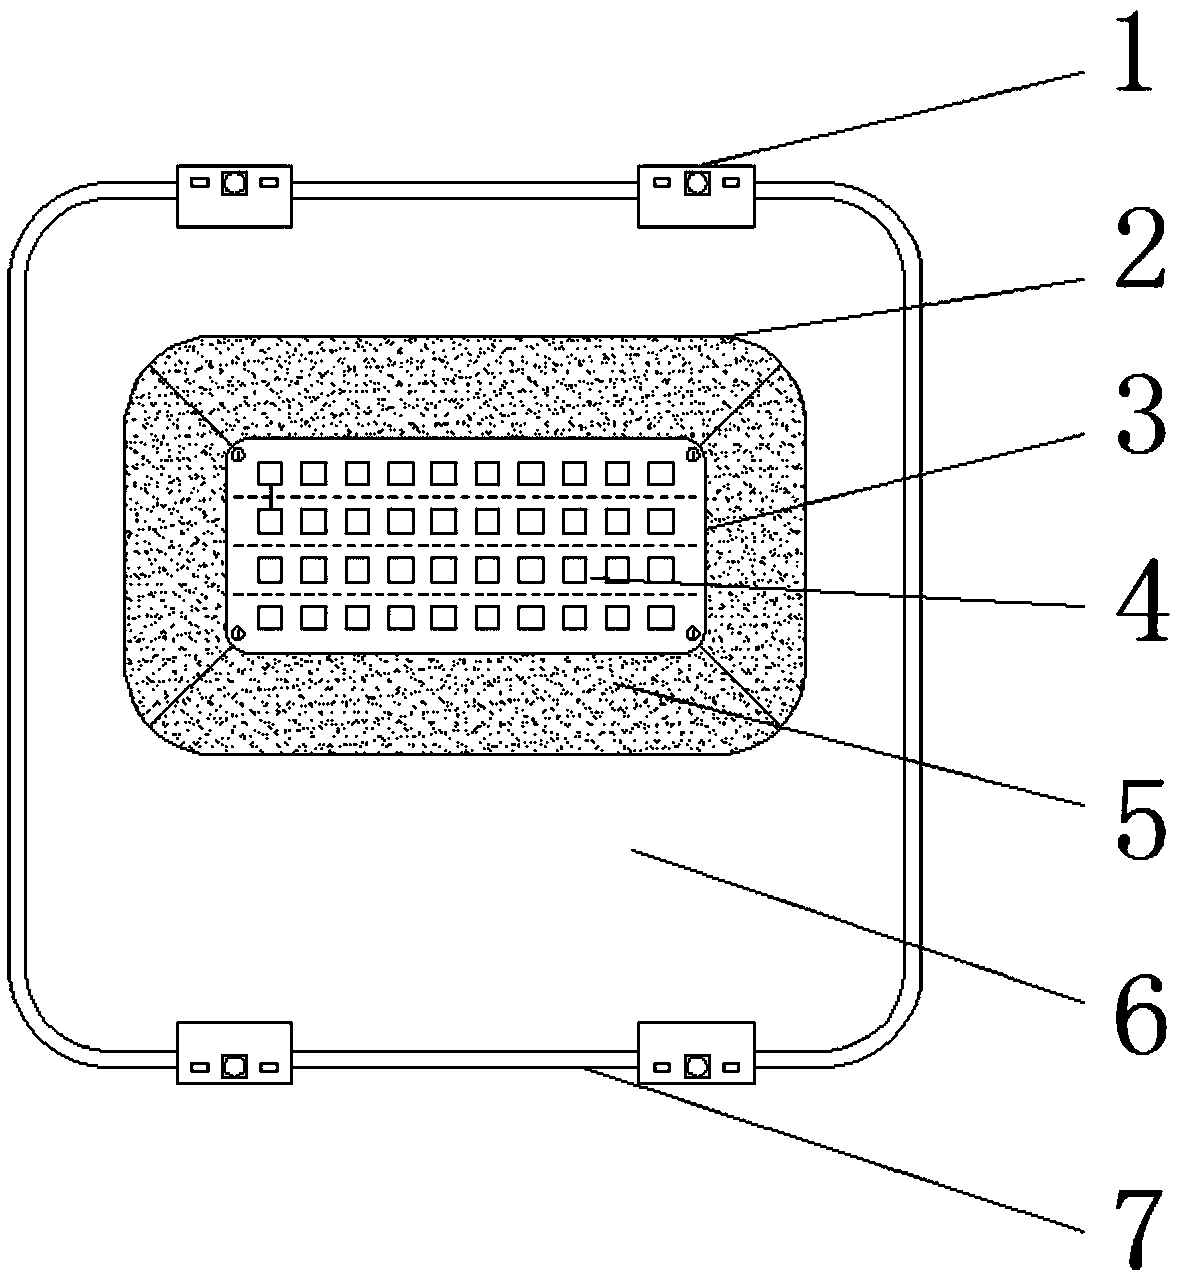 Kiwi LED light supplementing lamp and application thereof